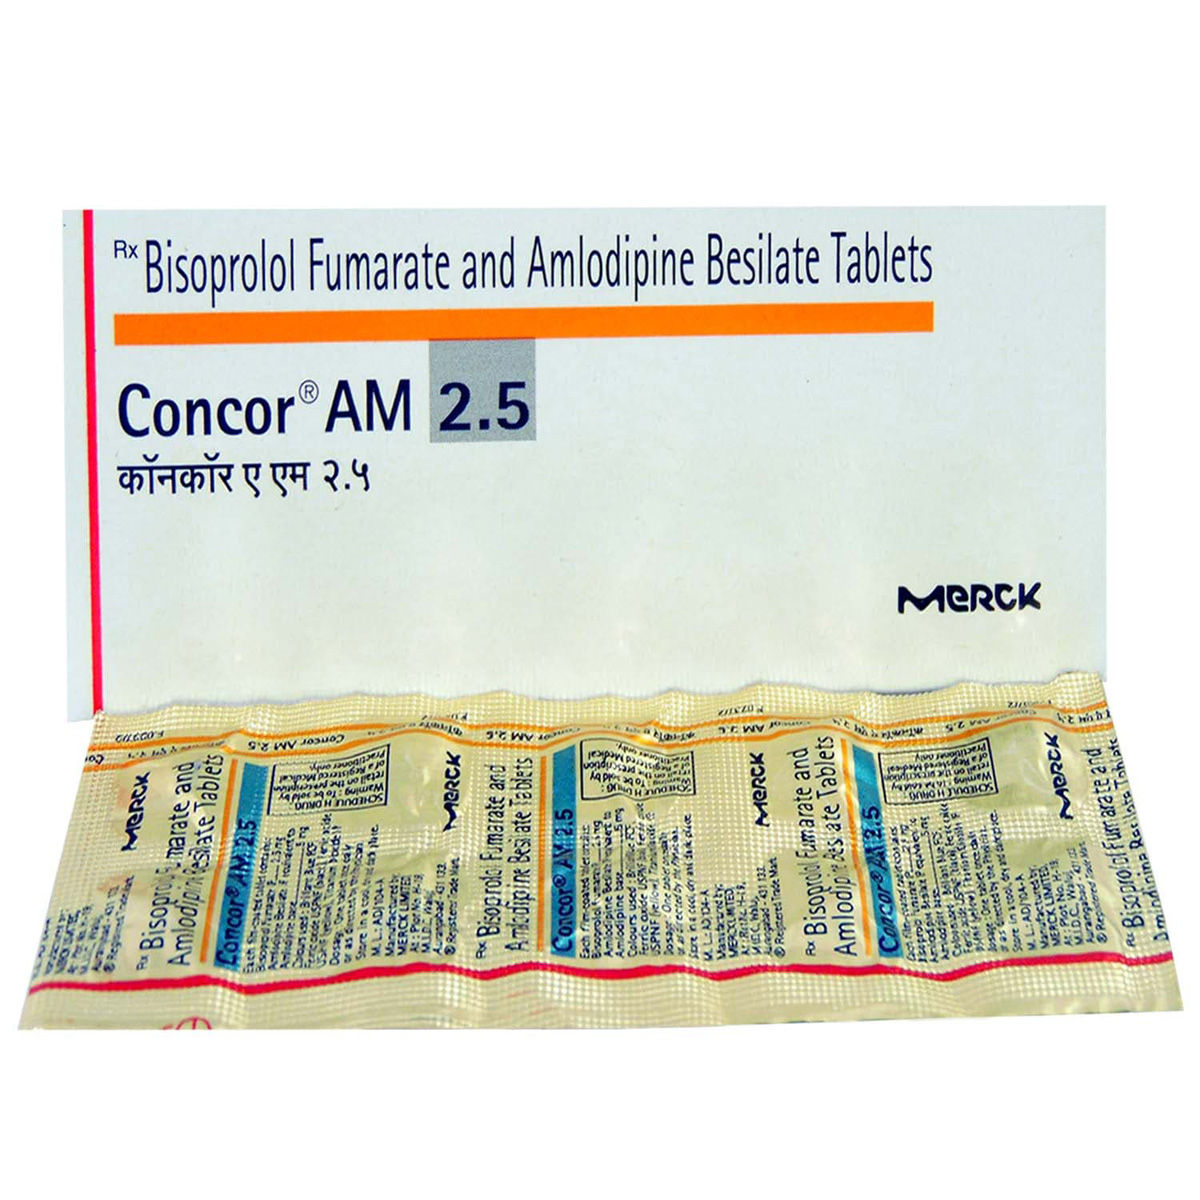 Concor AM 2.5 Tablet 10's Price, Uses, Side Effects, Composition ...